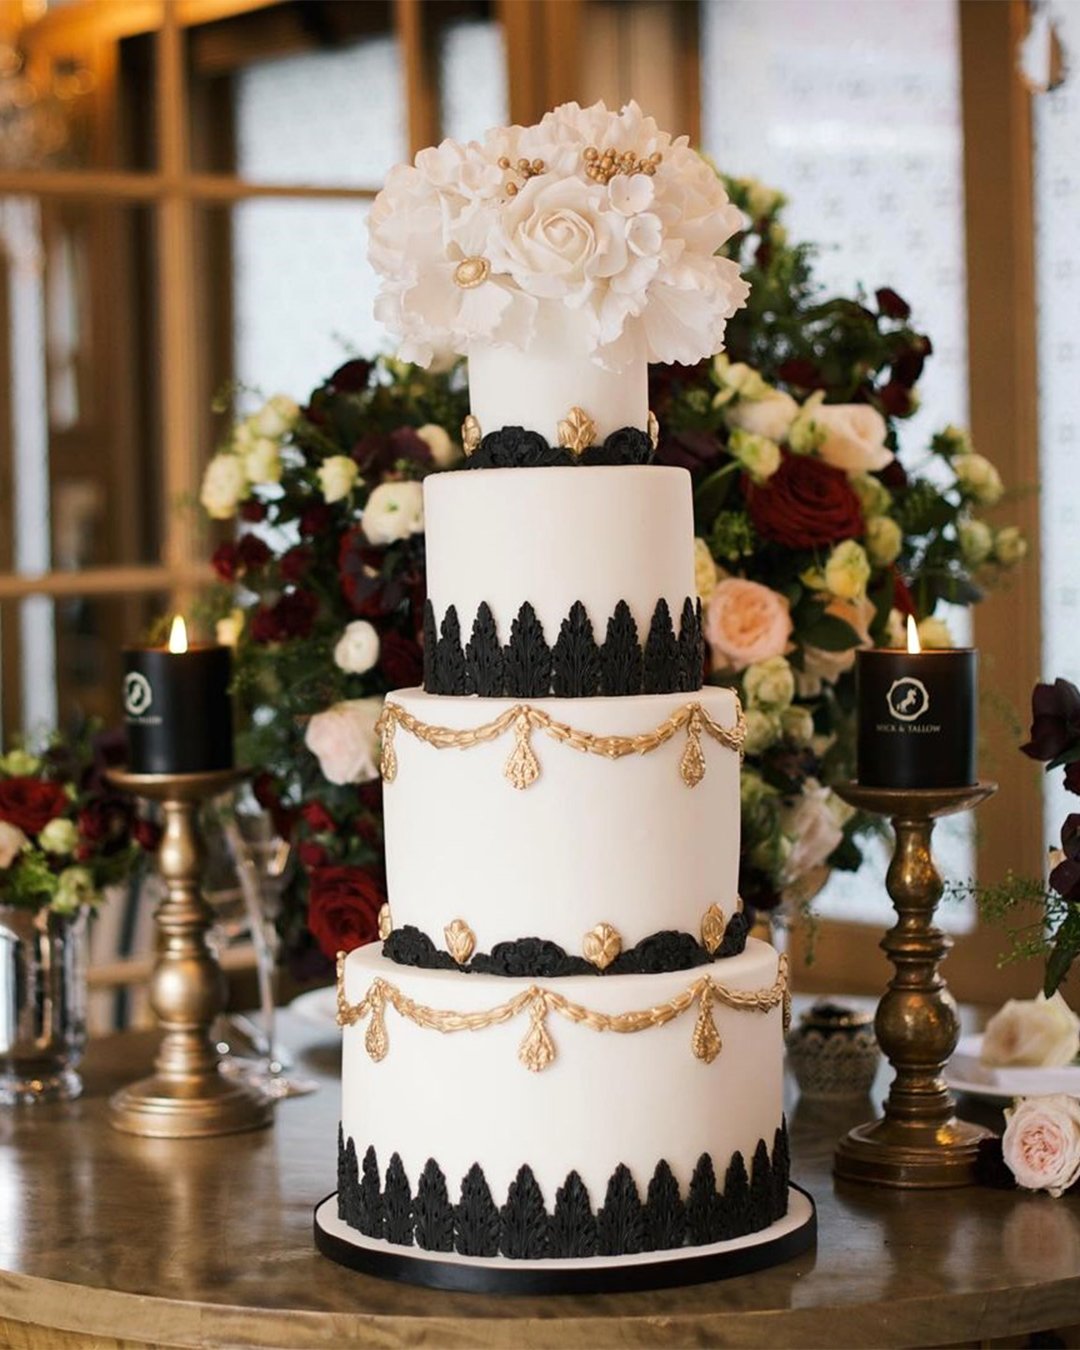 black and white wedding cakes elegant cakes with gold accents